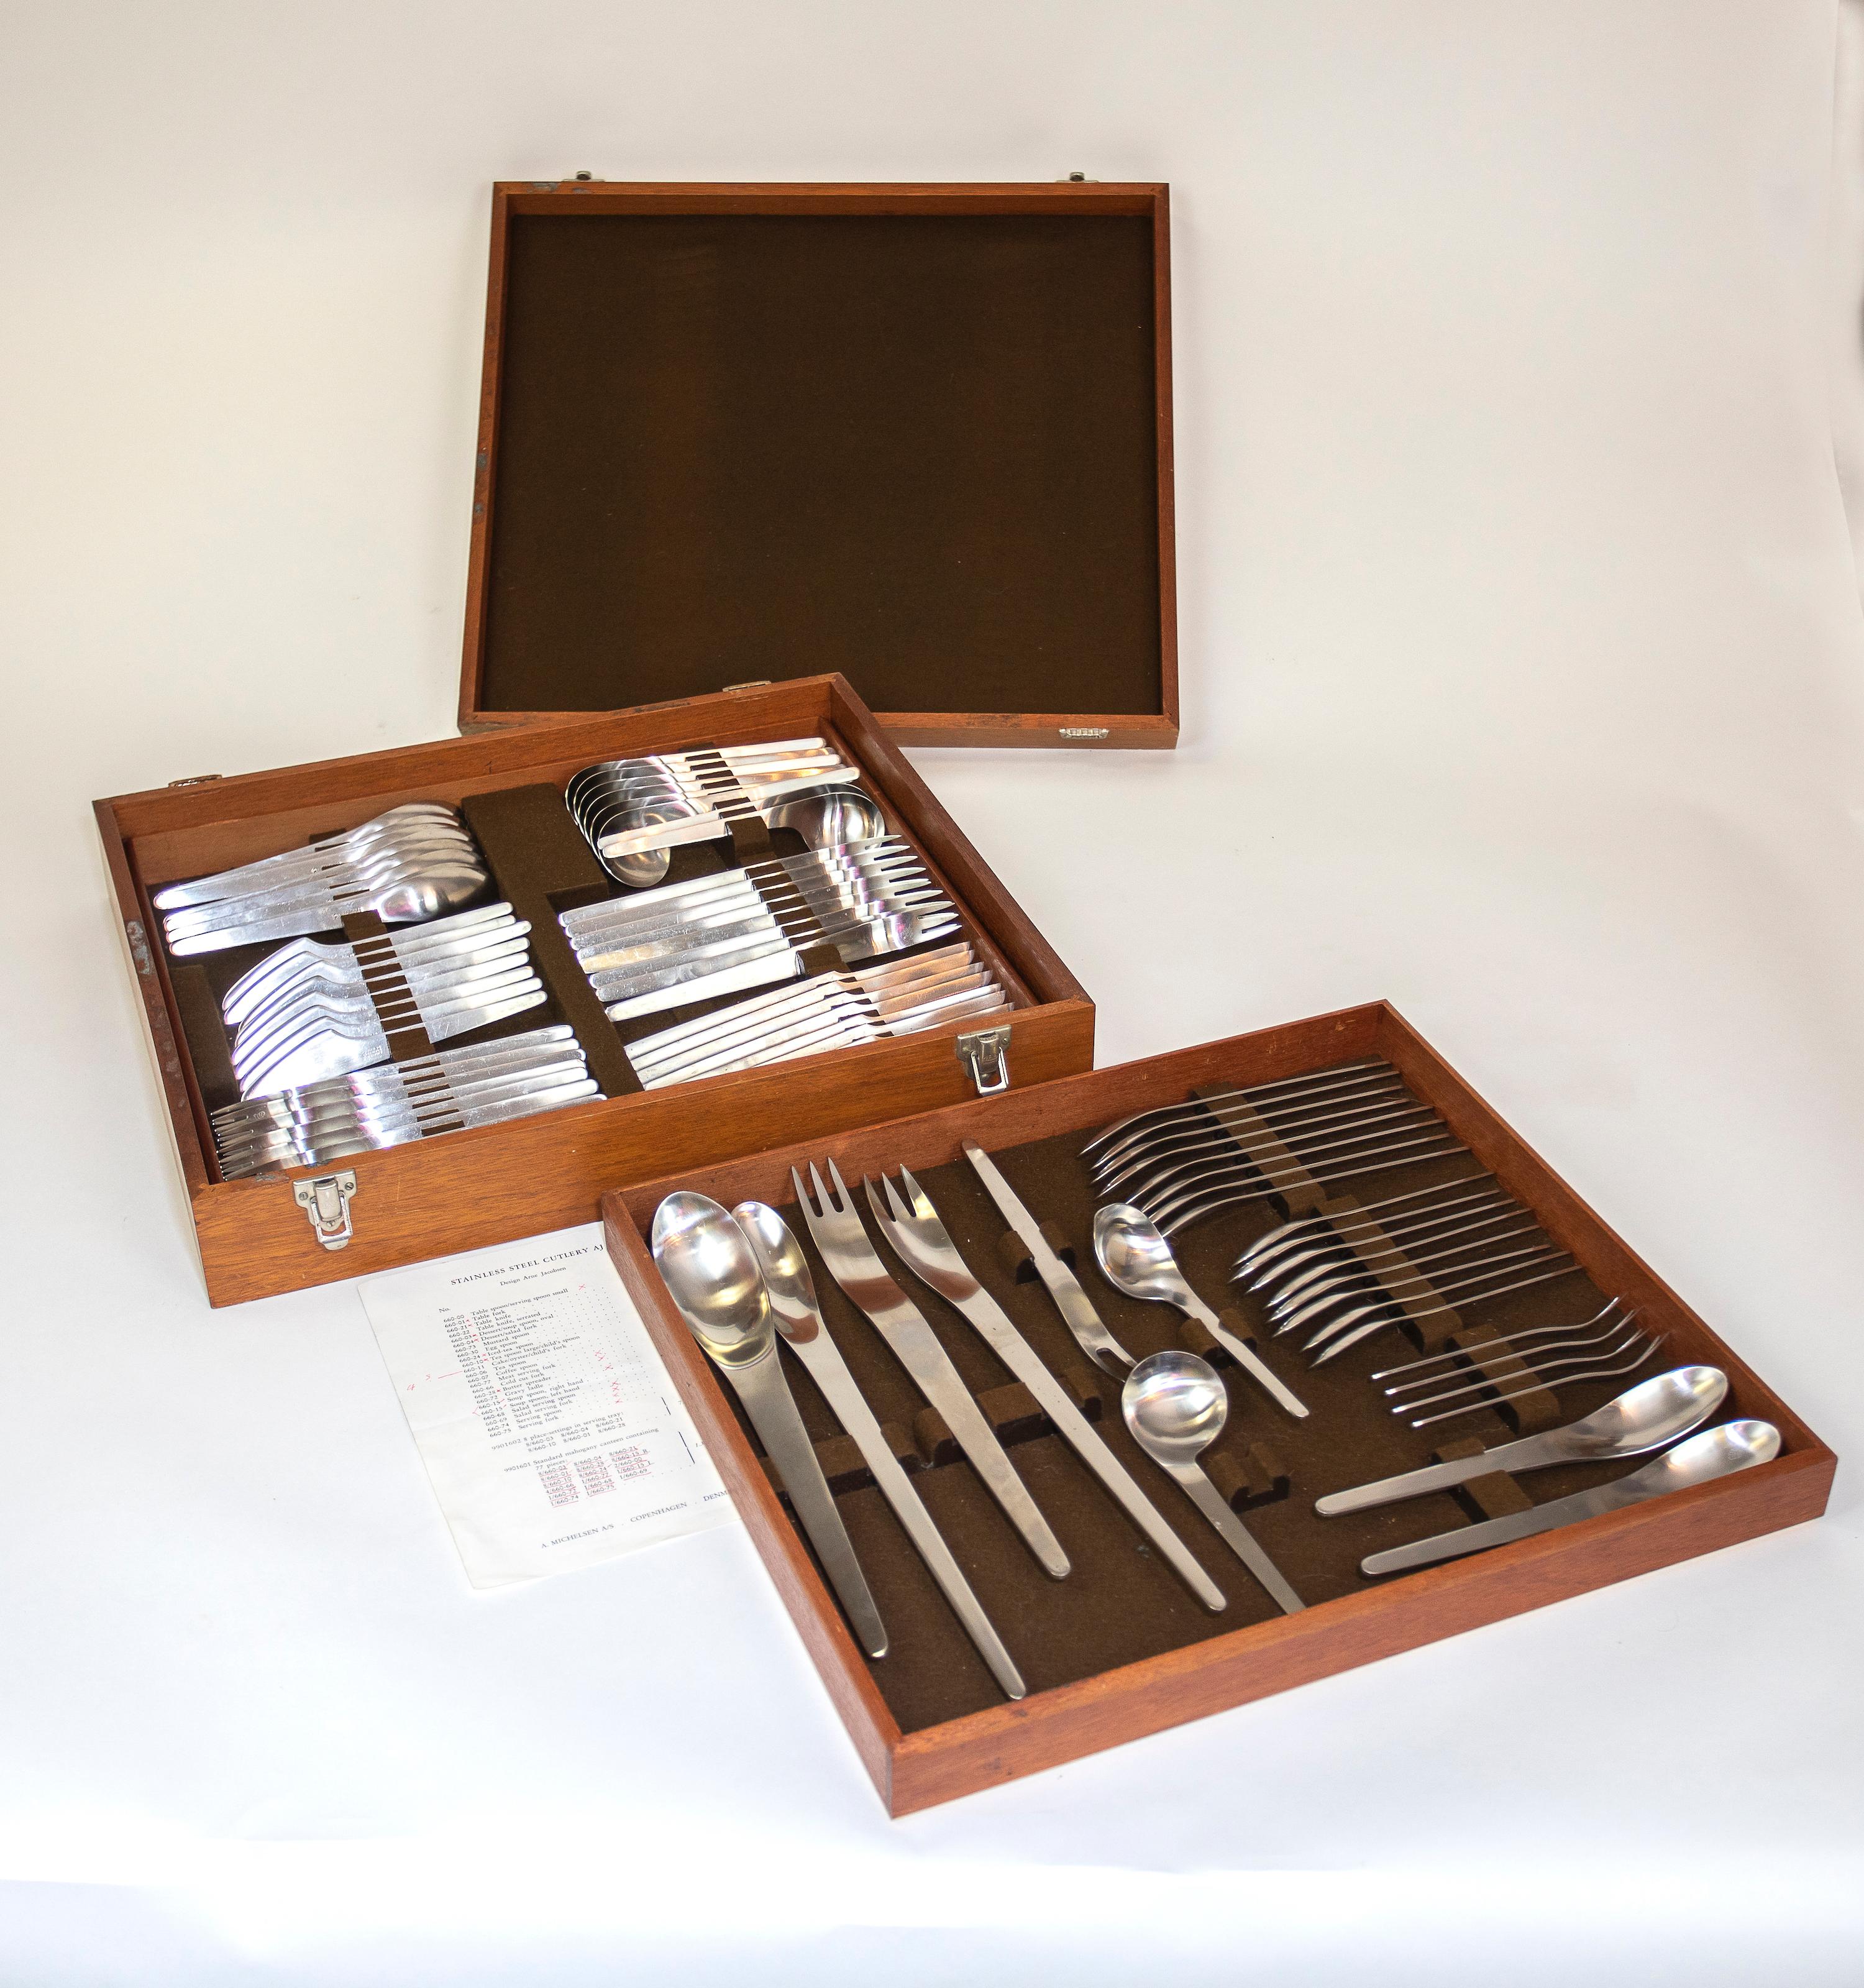 A Full Service for eight consisting of 8/ 8 piece place settings and 13 additional serving pieces.
Original fitted Mahogany Box
Original invoice and advertisement included.